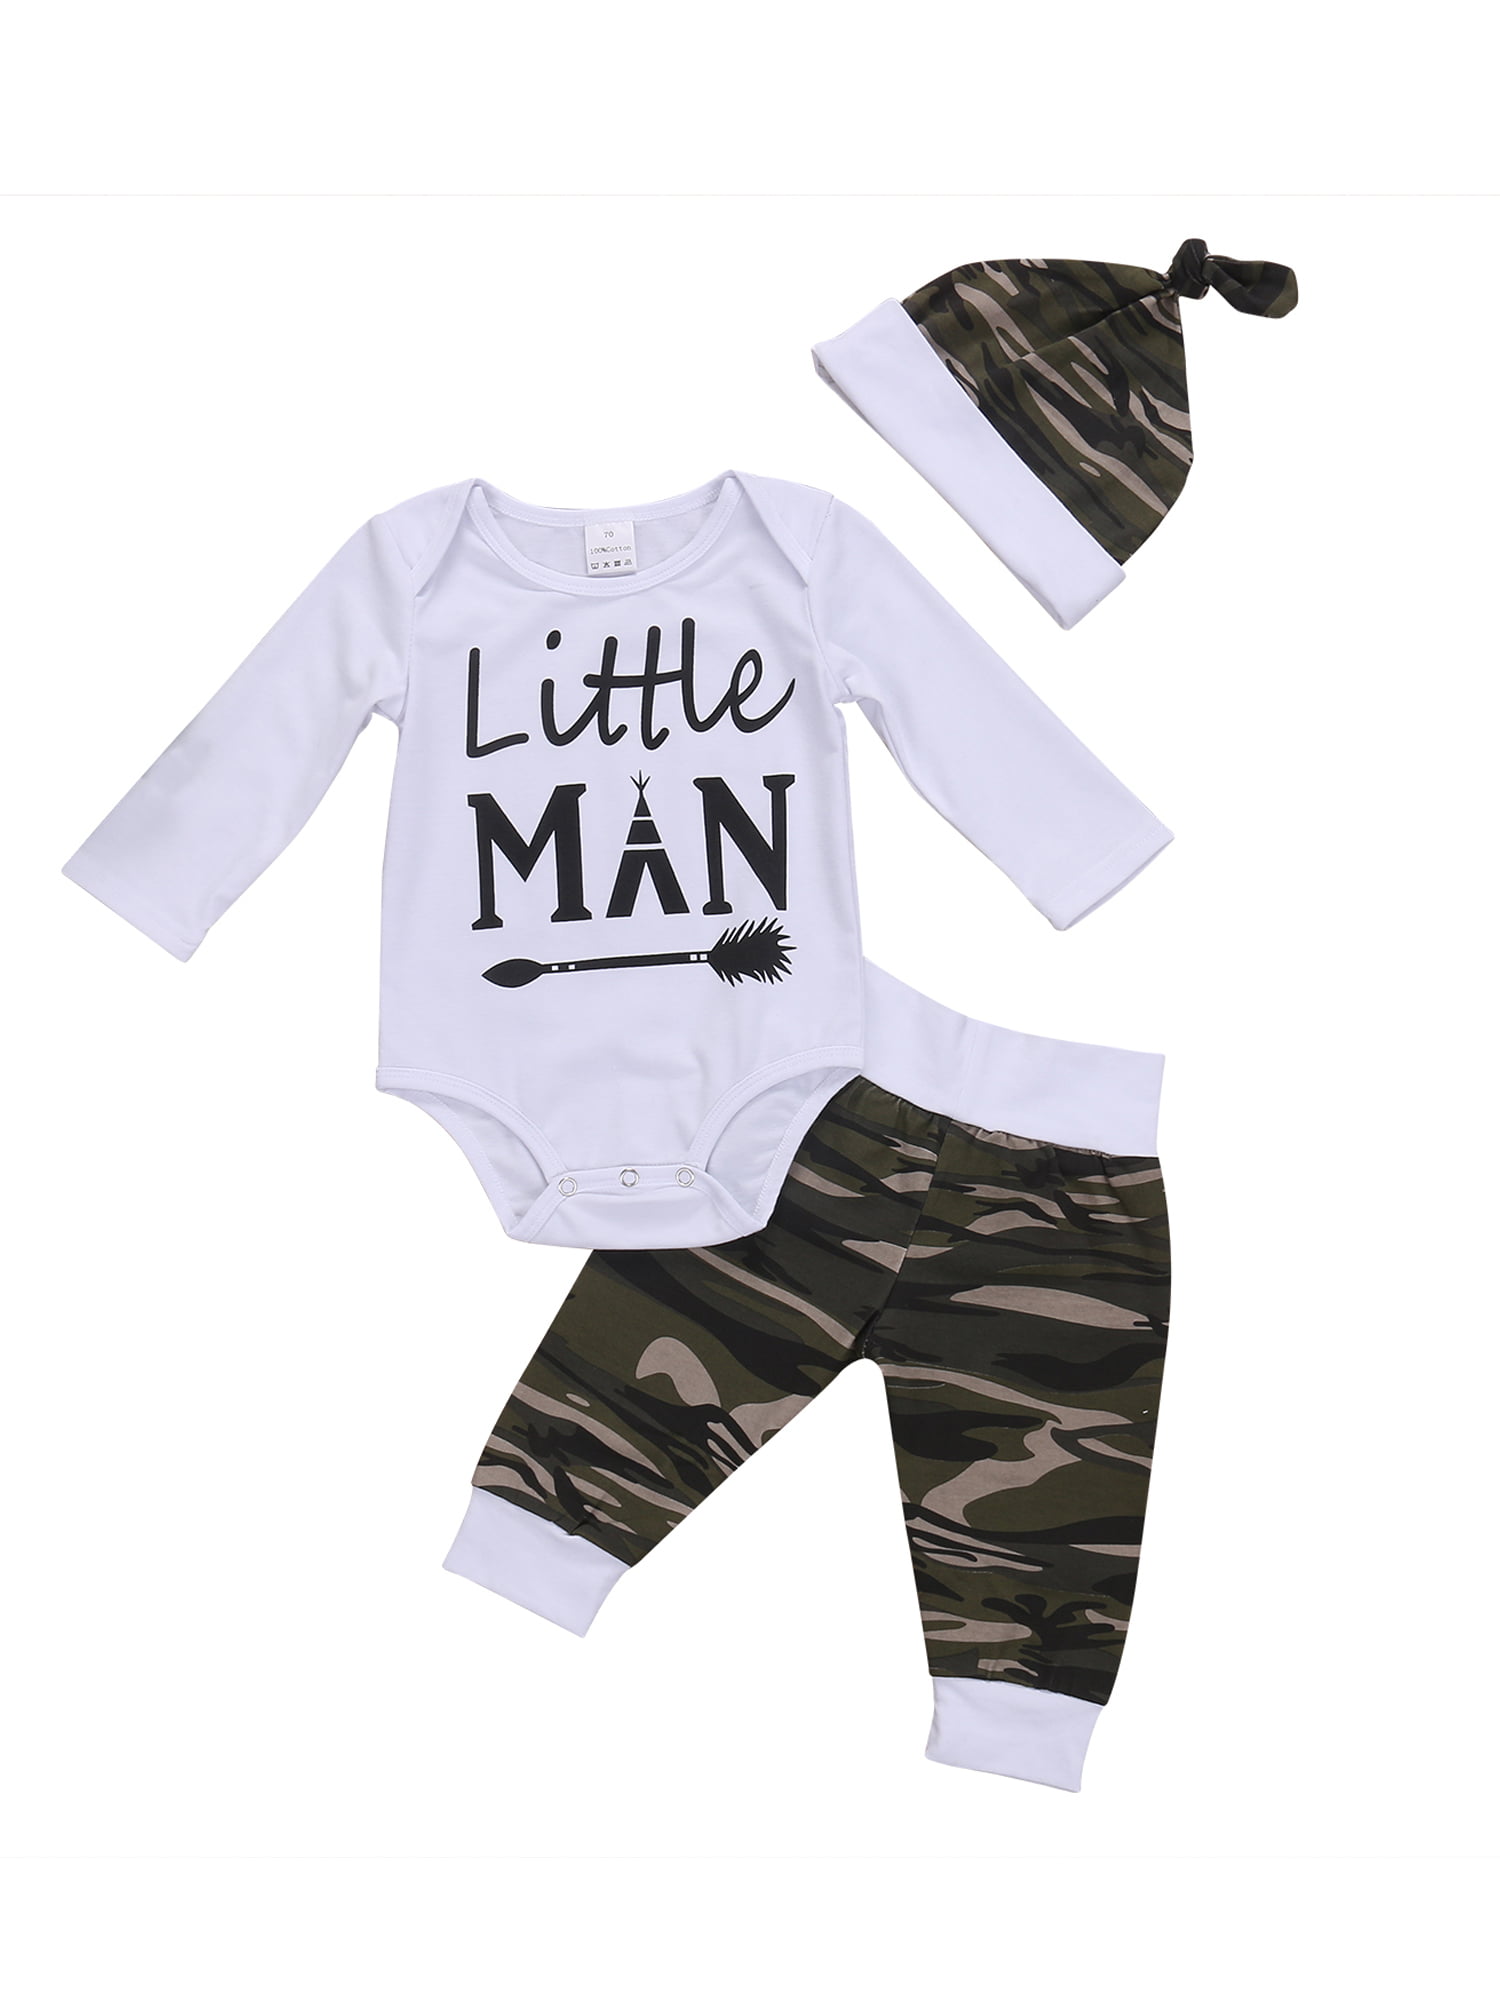 3Pcs Newborn Baby Boys Camouflage Tops Romper PaD02Ms Hat Outfits Set  Clothes 